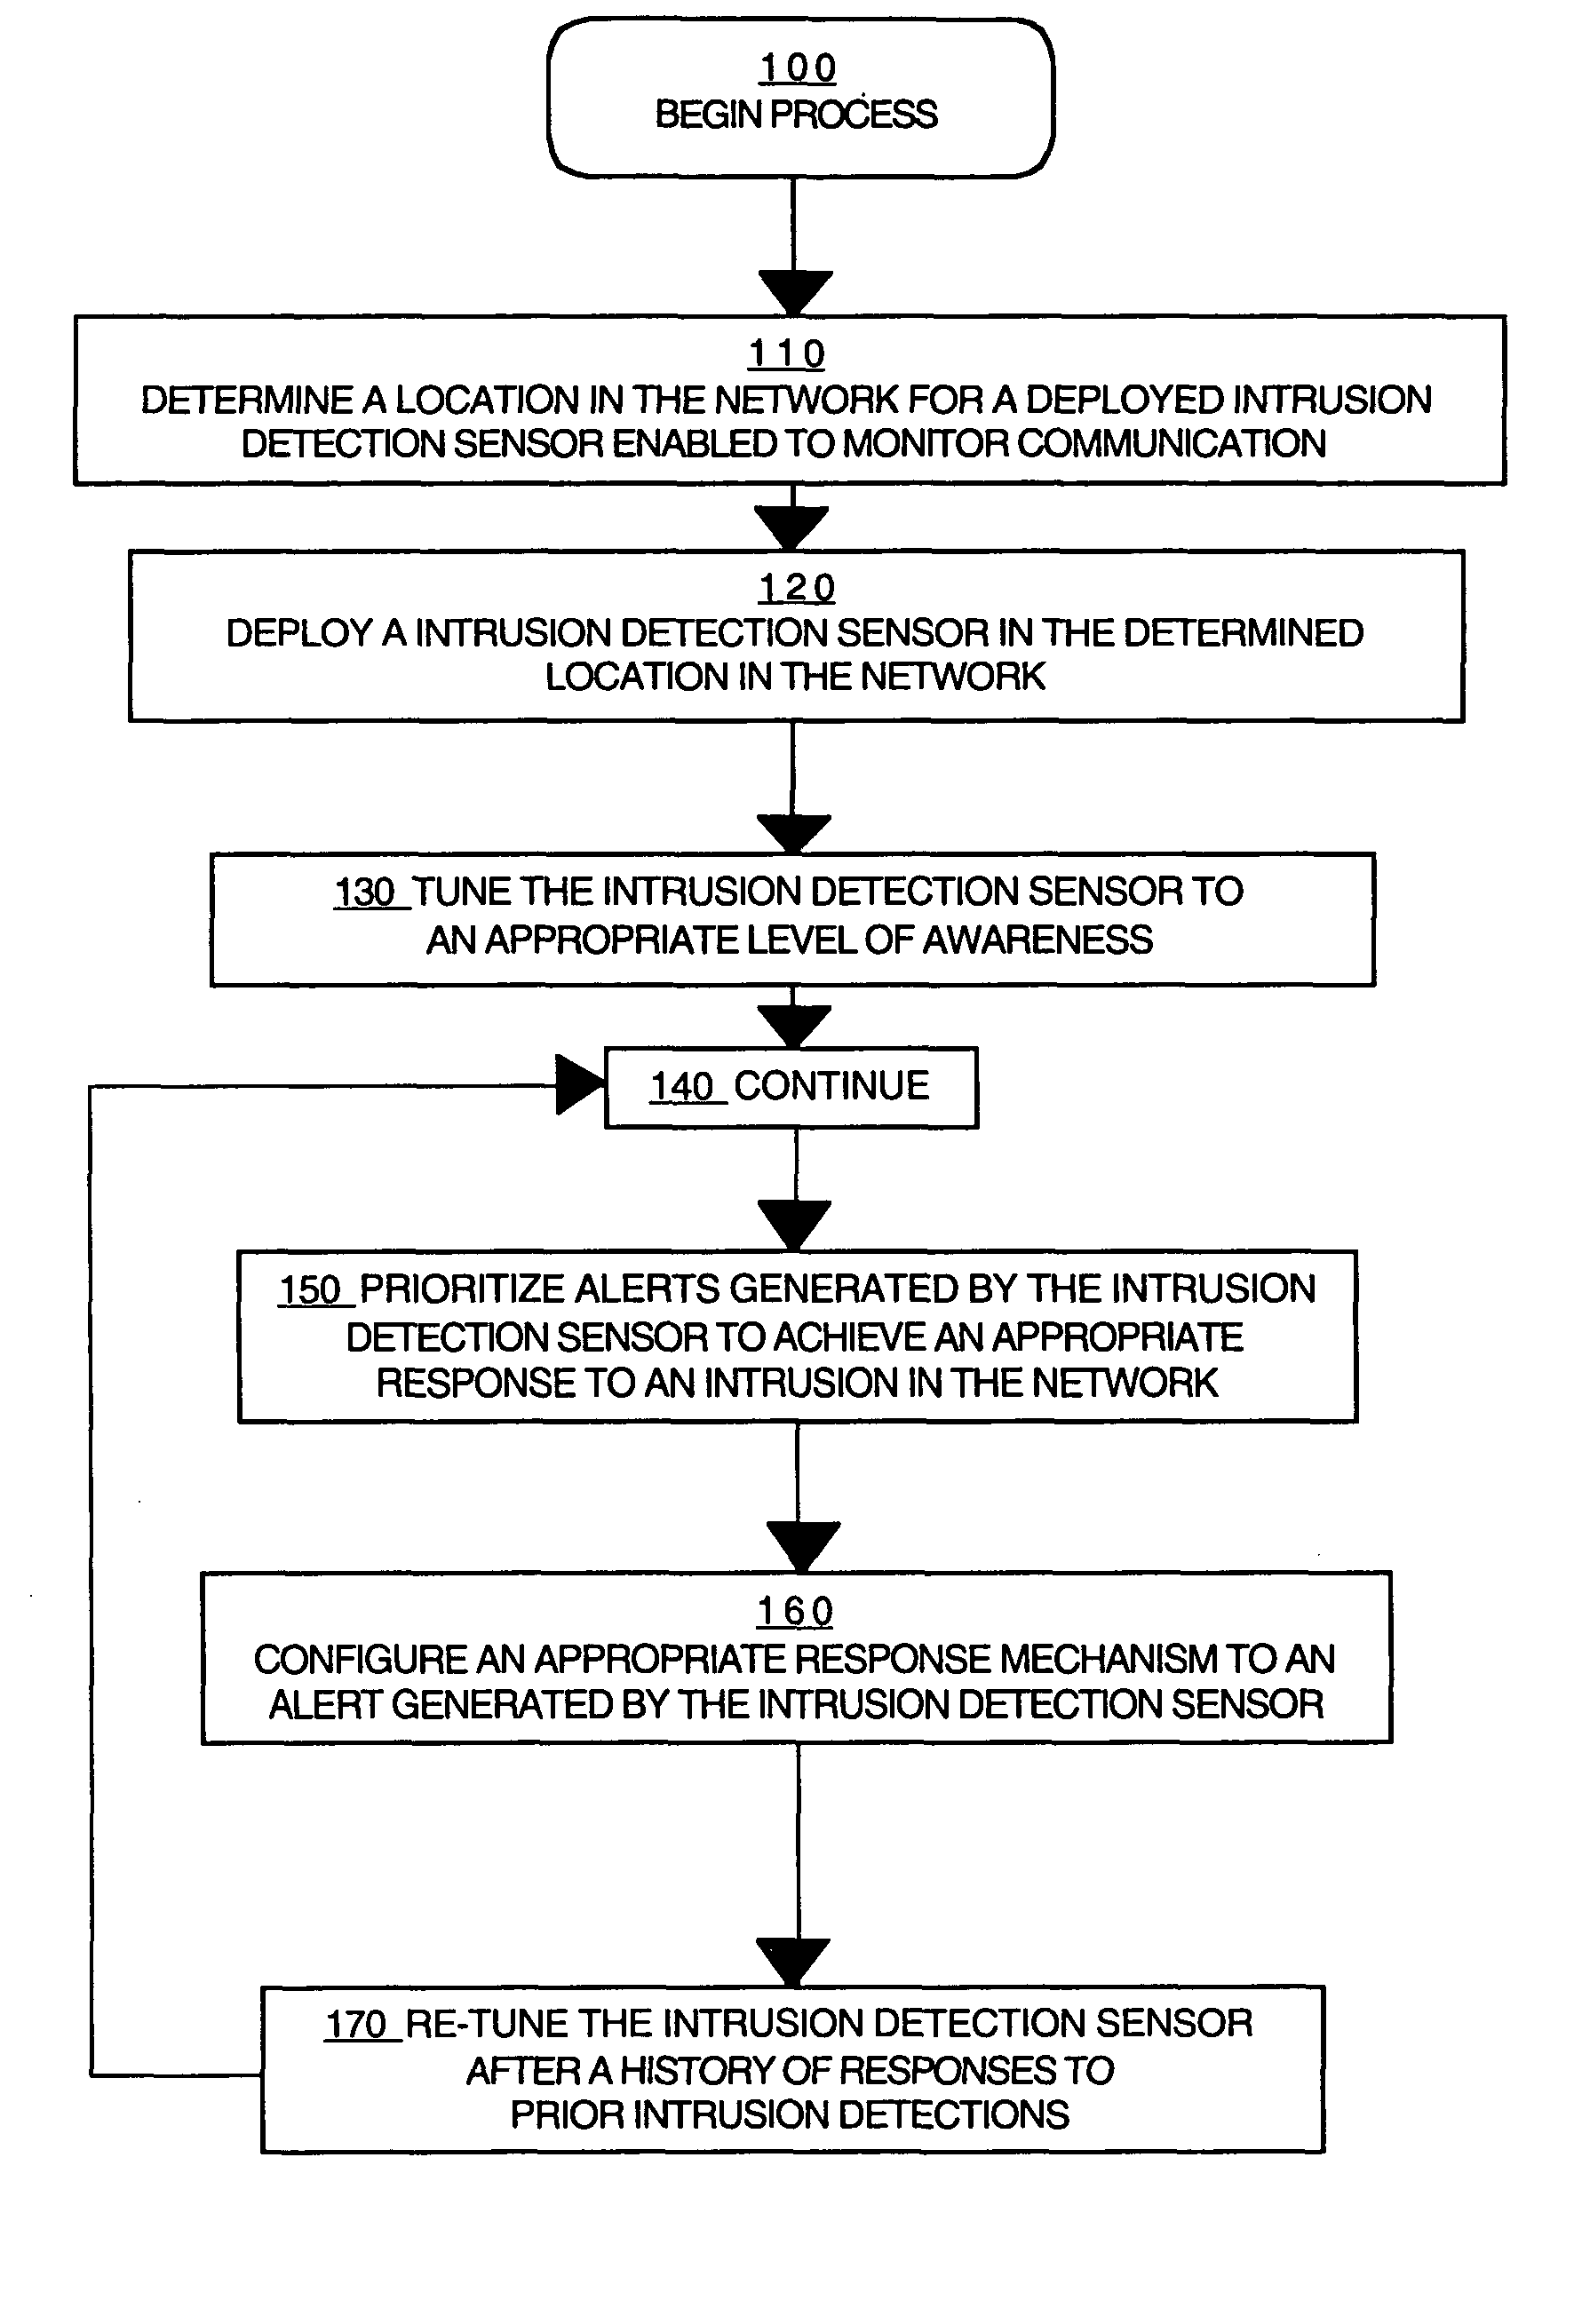 Method for configuring a network intrusion detection system